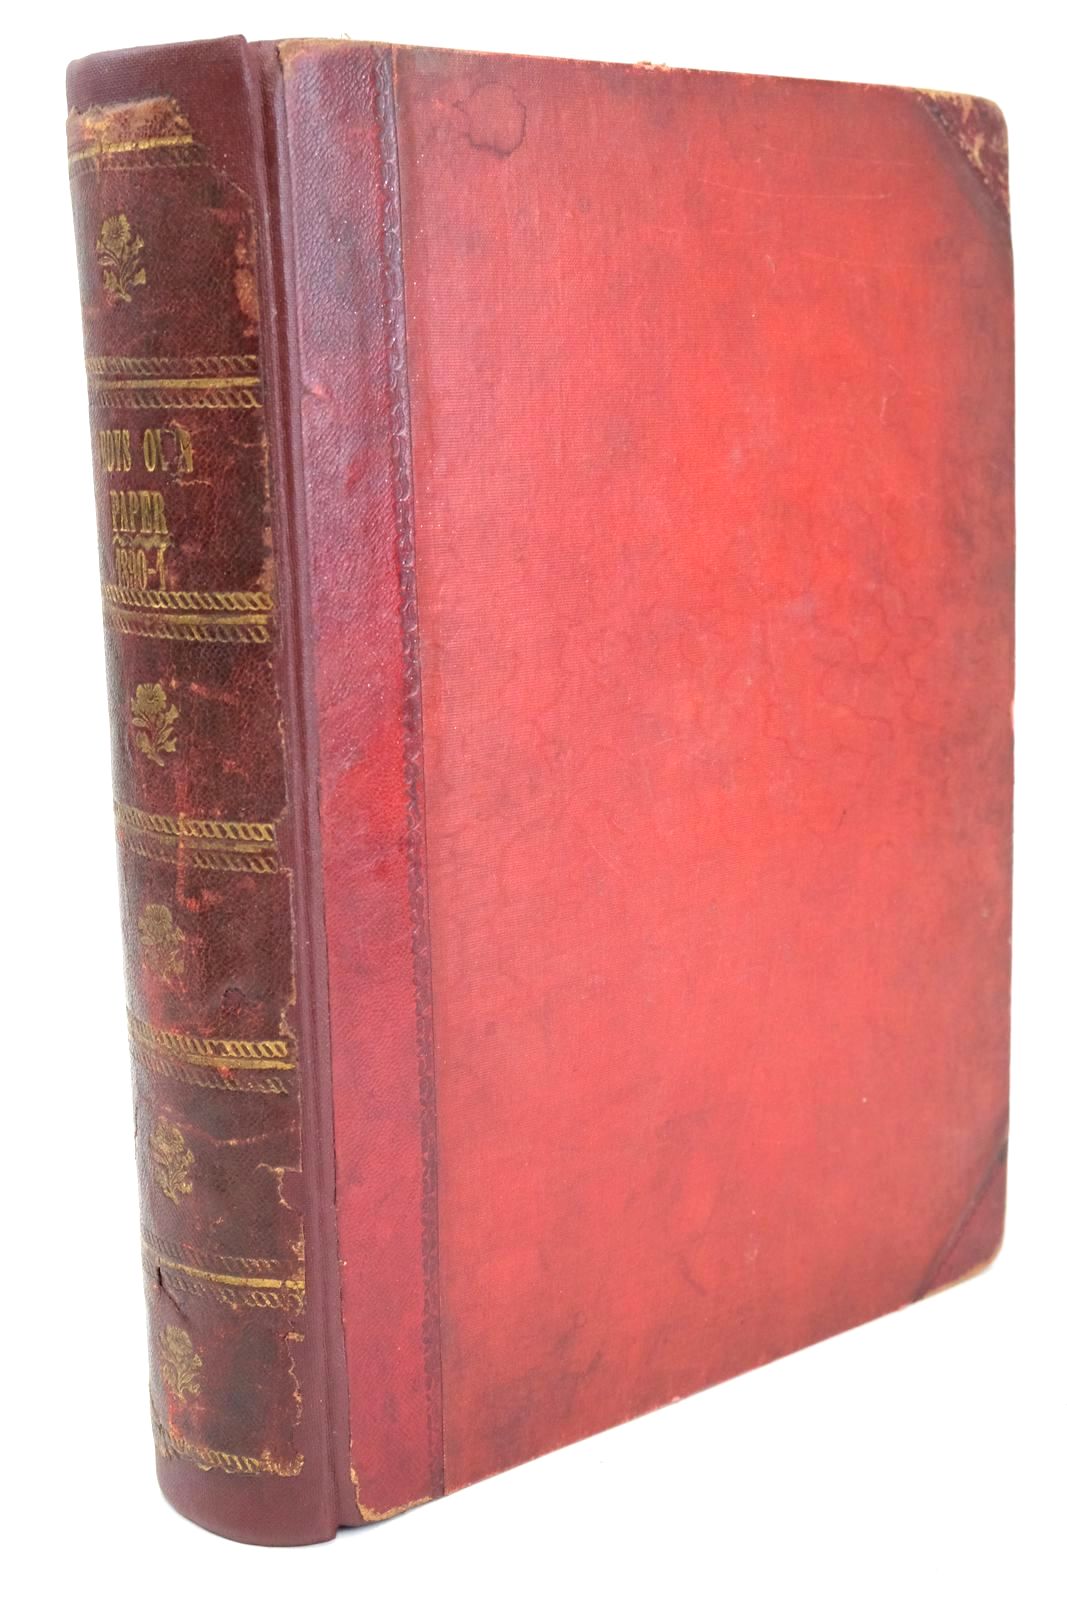 Photo of THE BOY'S OWN ANNUAL - VOLUME 13 written by Reed, Talbot Baines Stables, Gordon Wood, Theodore et al, illustrated by Brangwyn, Frank Browne, Gordon et al., published by The Boy's Own Paper (STOCK CODE: 1325971)  for sale by Stella & Rose's Books